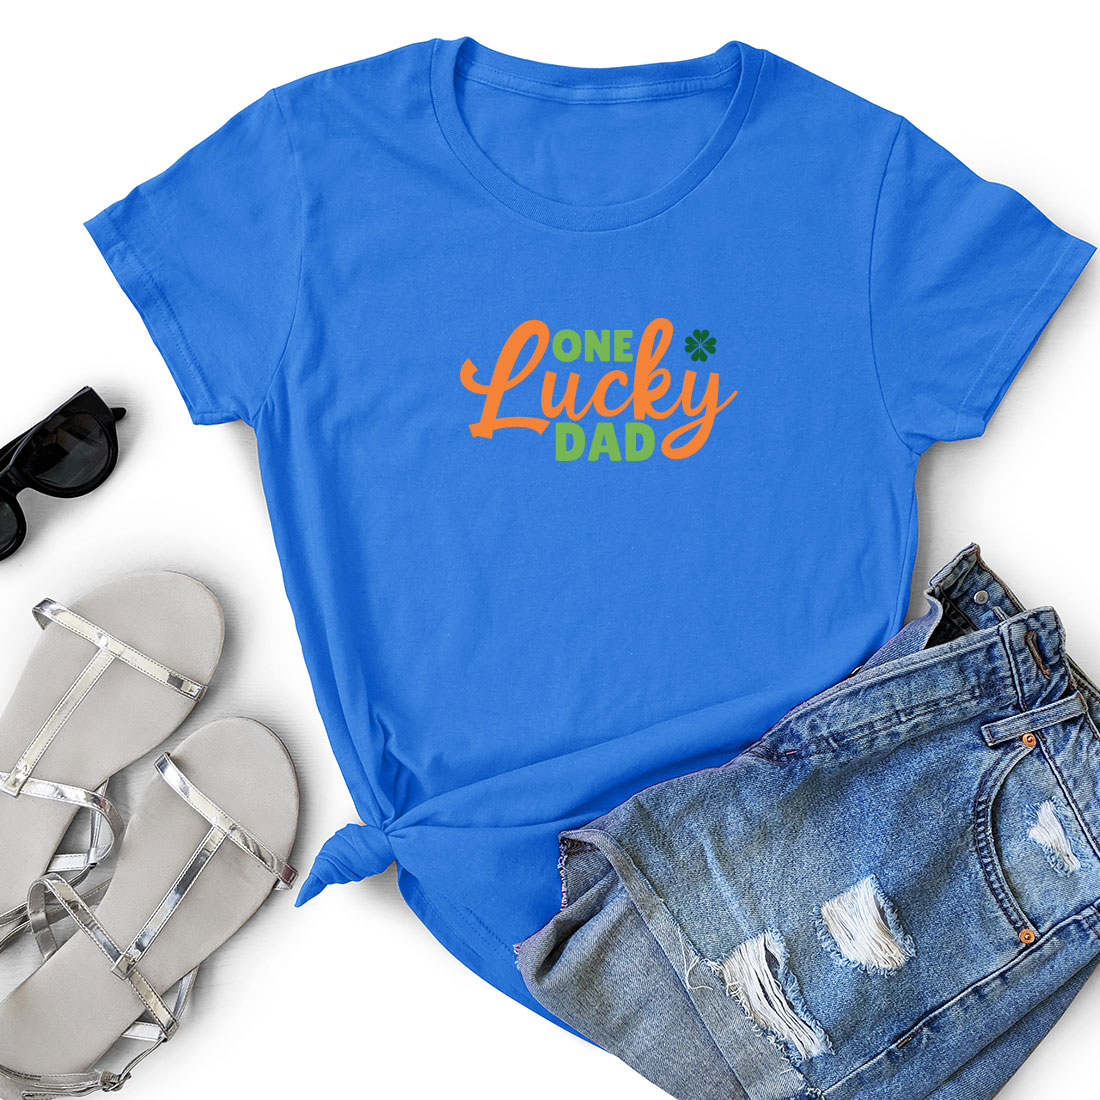 T - shirt that says one lucky day next to a pair of shorts and.